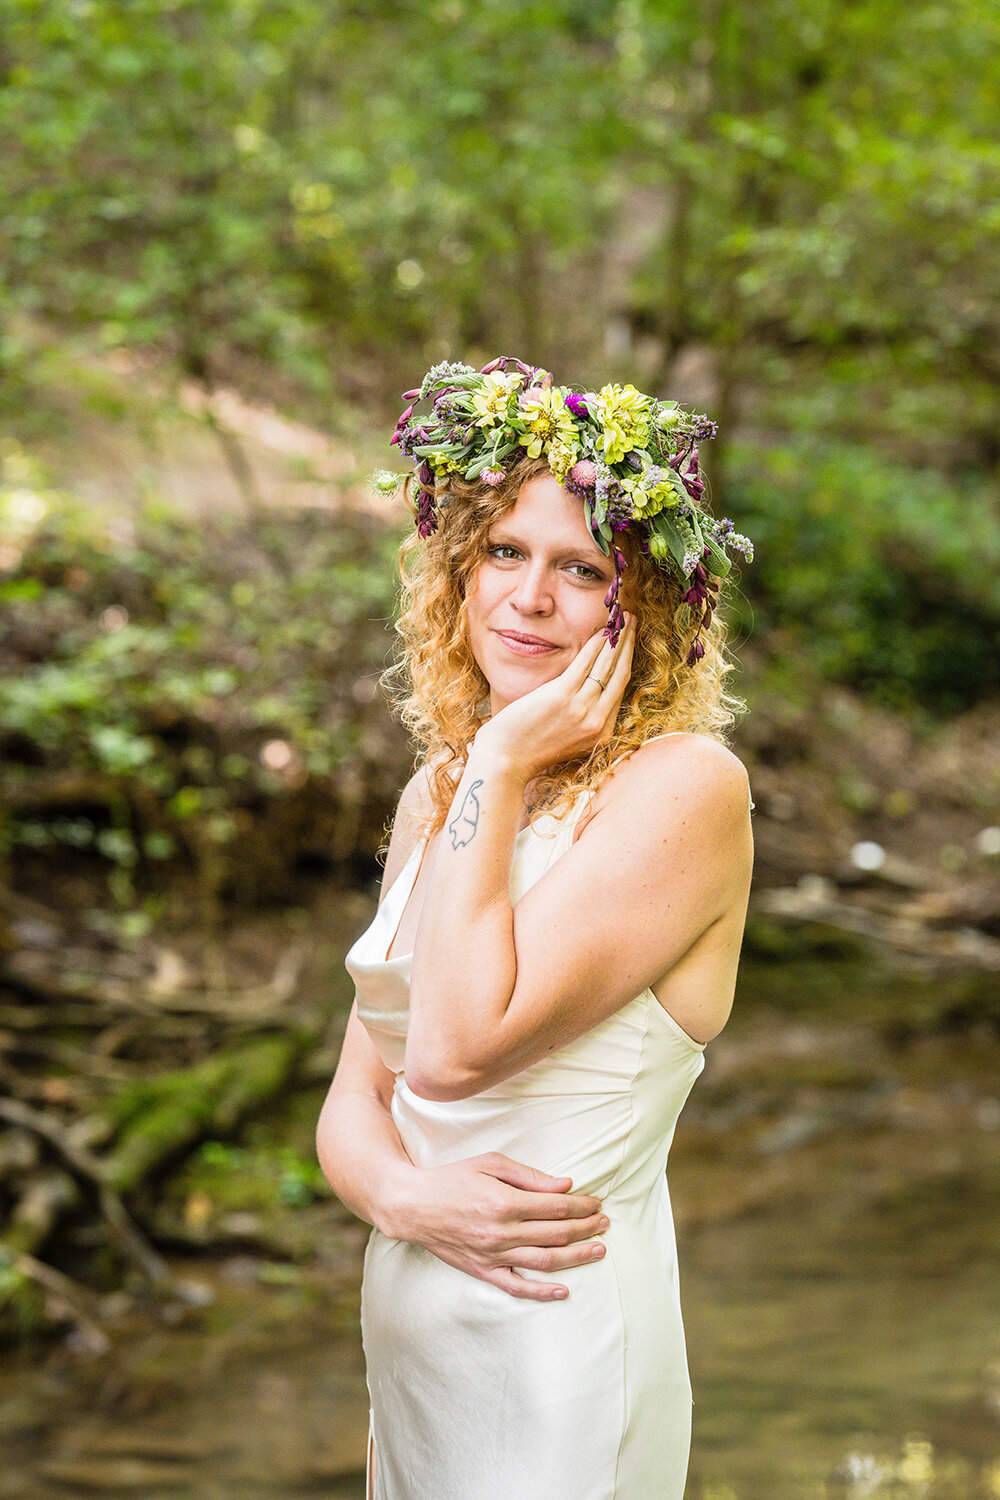 A bride grins while standing in the shallow pond at Fishburn Park for a formal portrait. She is wearing a flower crown on her hand and a simple silk cream dress. She holds onto herself and places her other hand on her face.